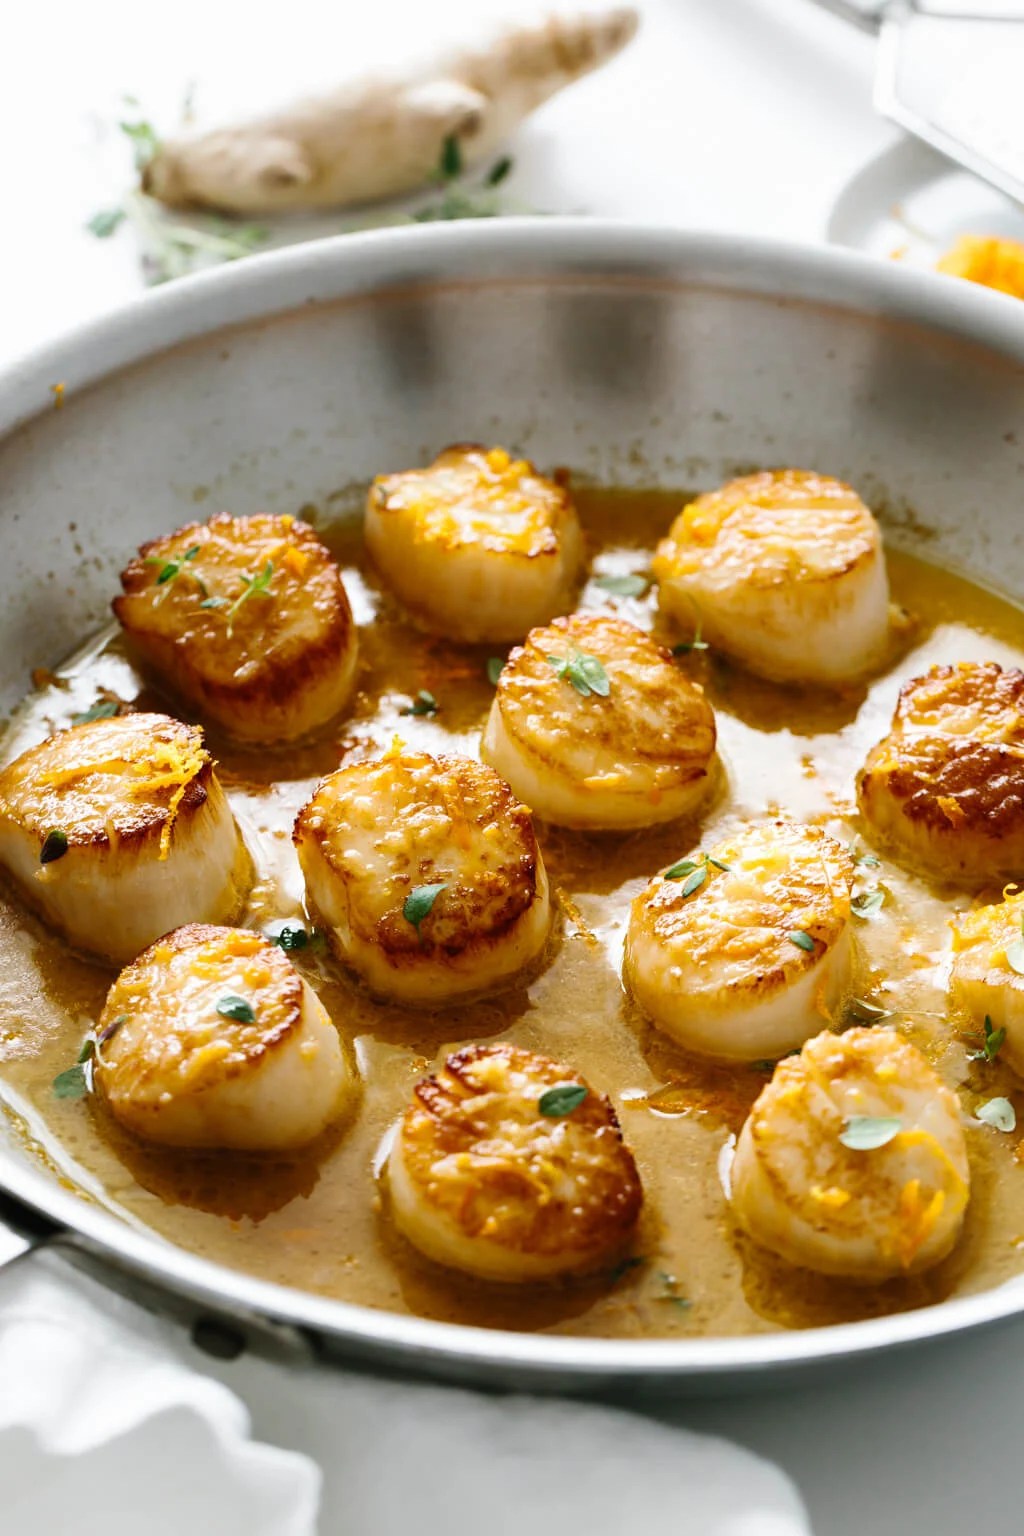 Several scallops in a pan.